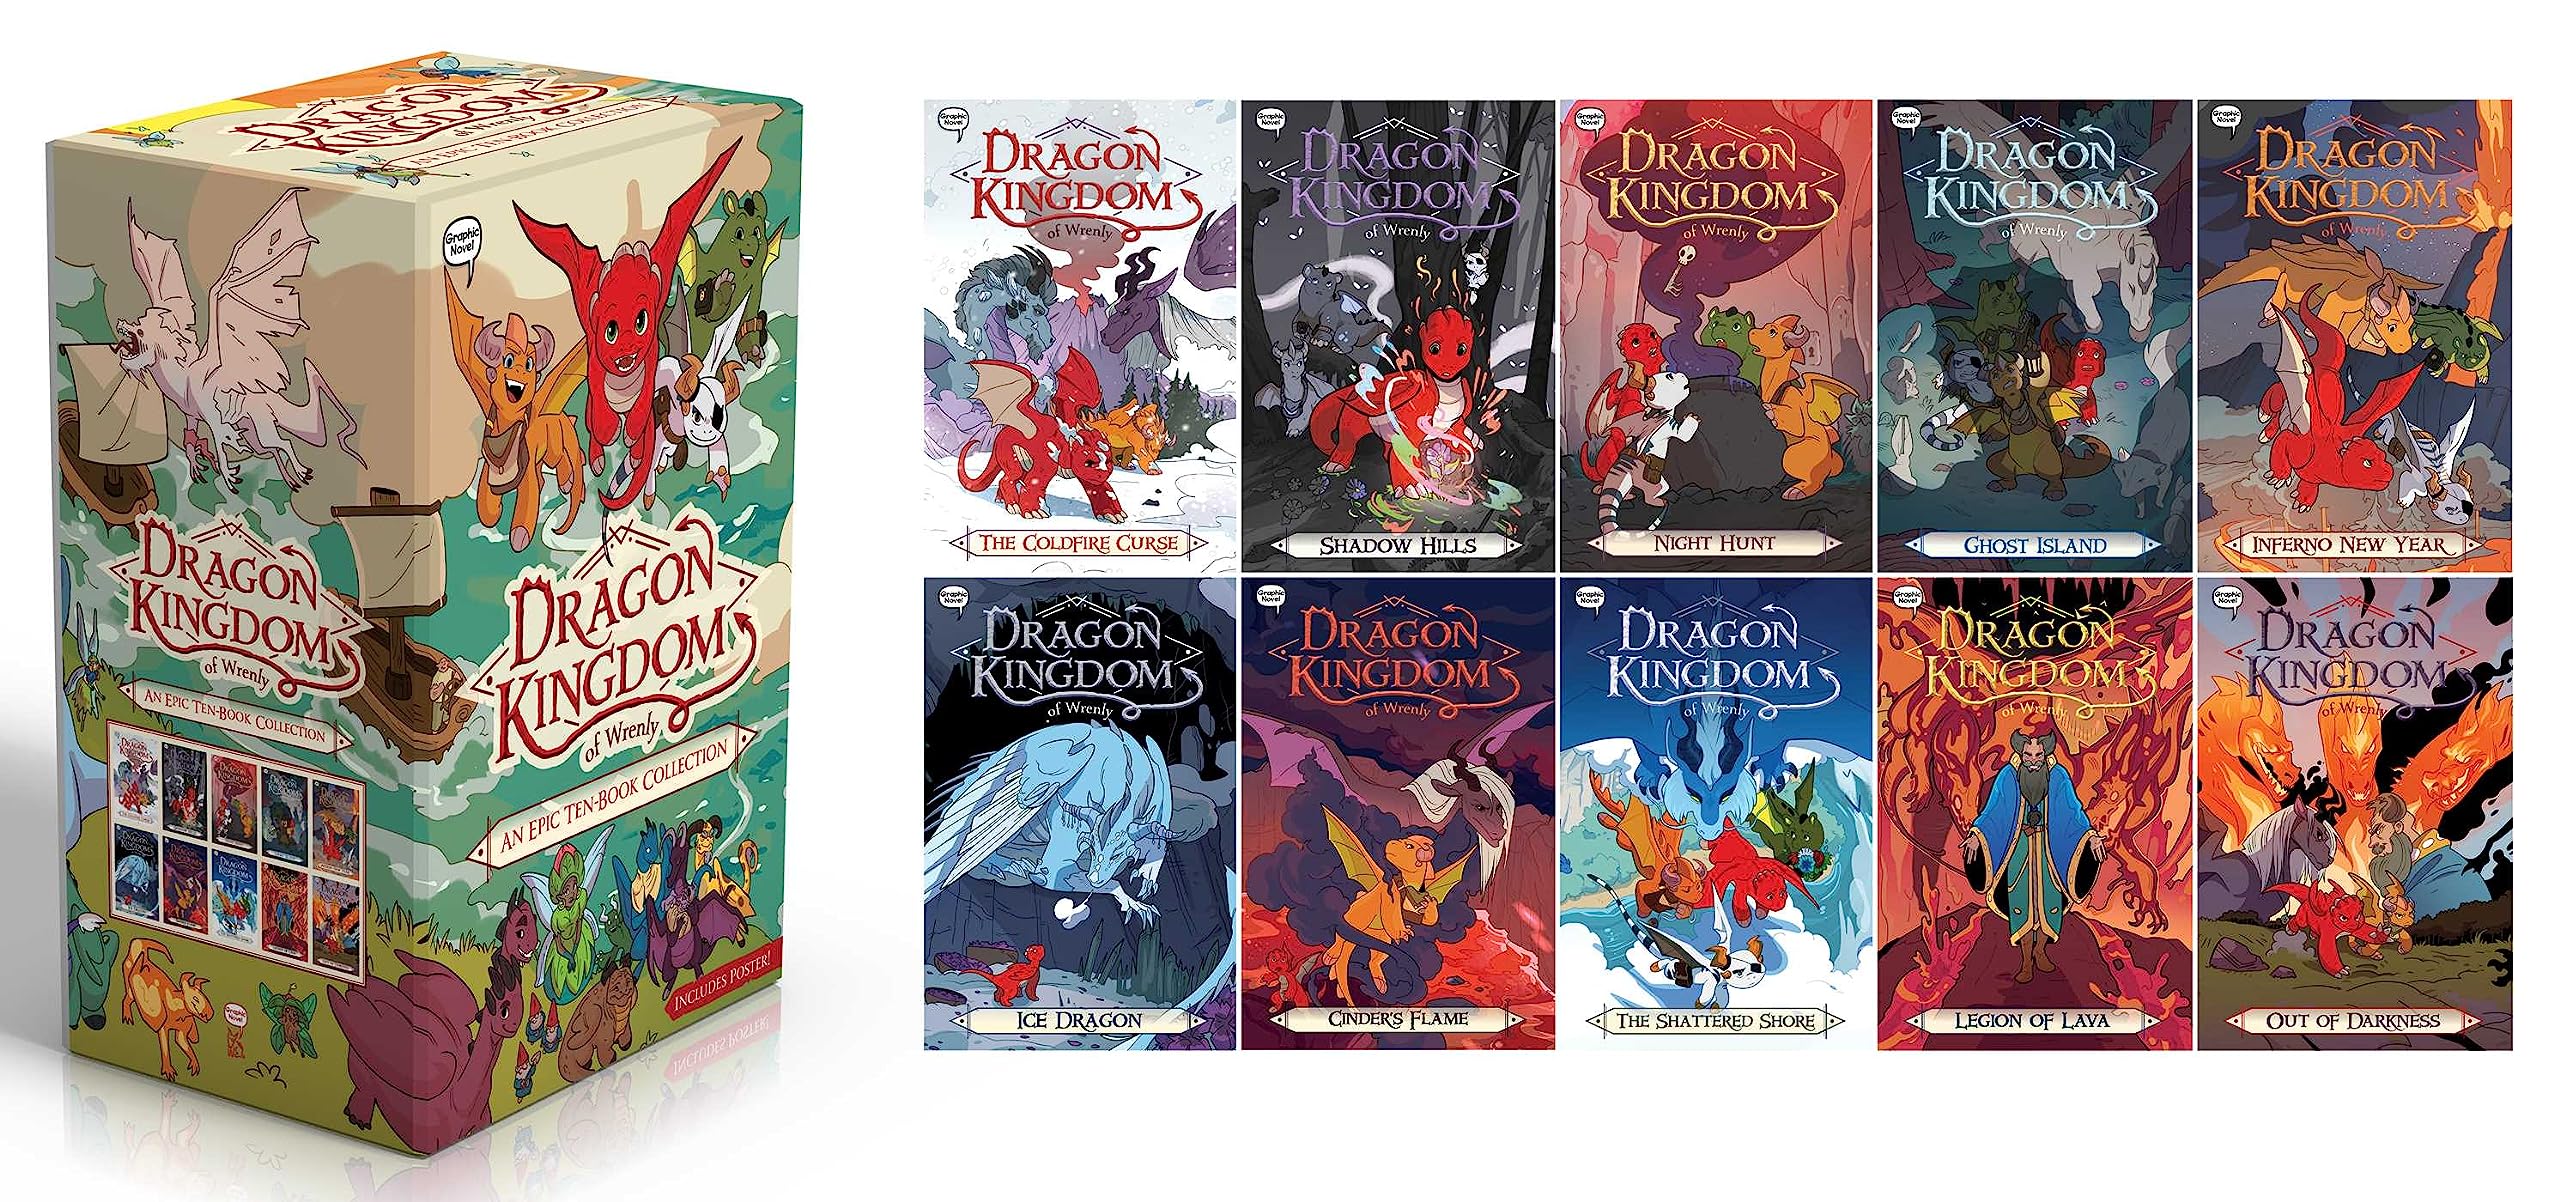 Dragon Kingdom of Wrenly An Epic Ten-Book Collection (Includes Poster!) (Boxed Set): The Coldfire Curse; Shadow Hills; Night Hunt; Ghost Island; ... Shore; Legion of Lava; Out of Darkness